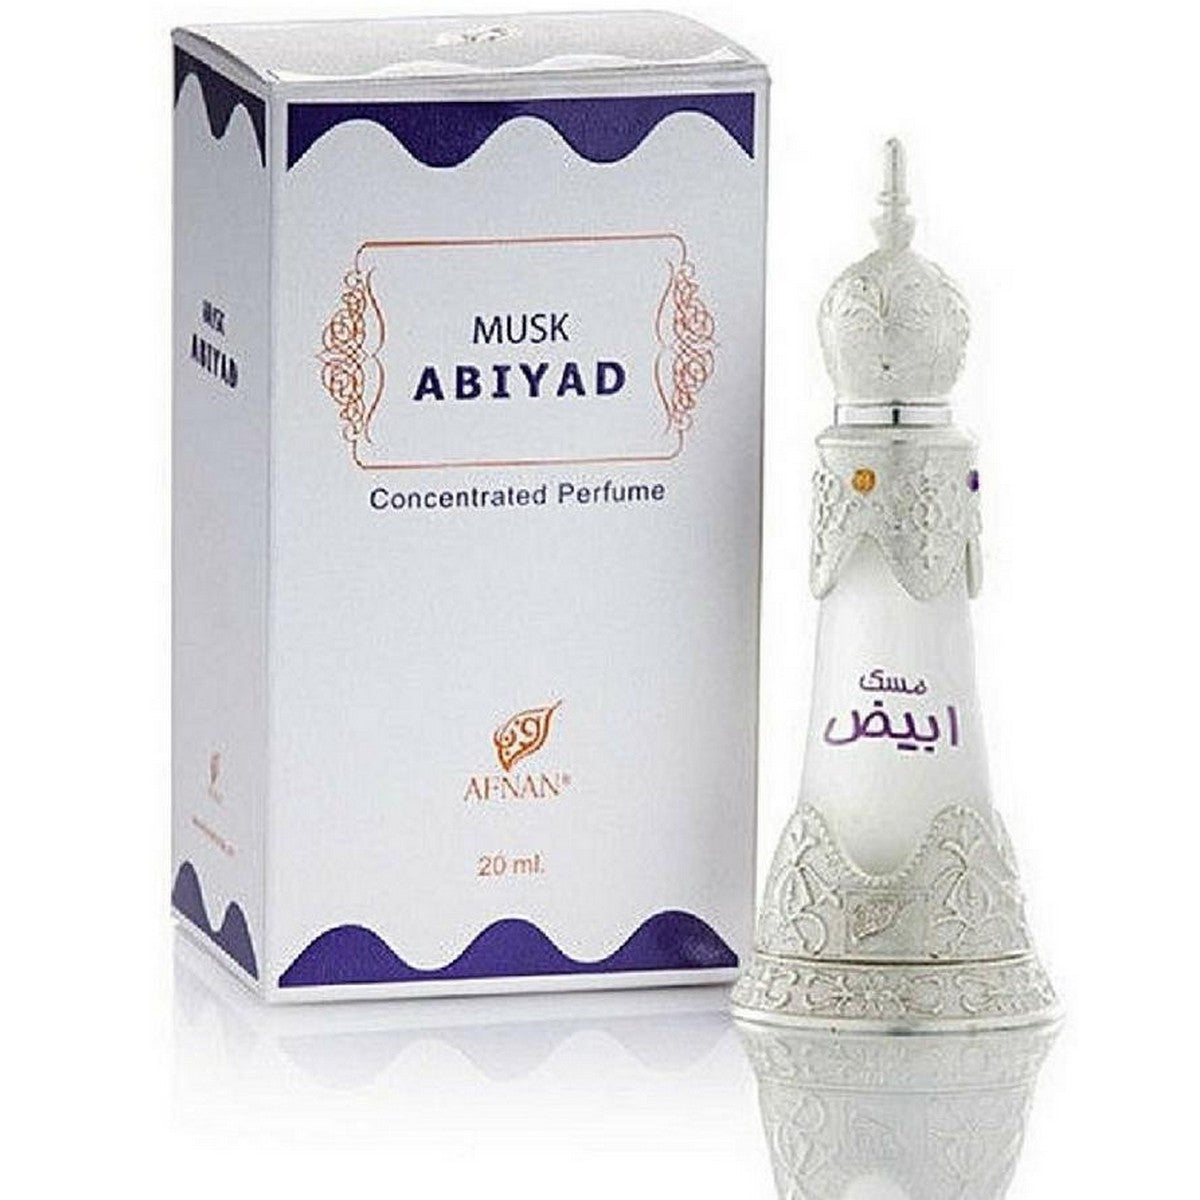 Afnan Abiyad Musk | .67 fl oz | 20 ML | Concentrated perfume oil | Alcohol free